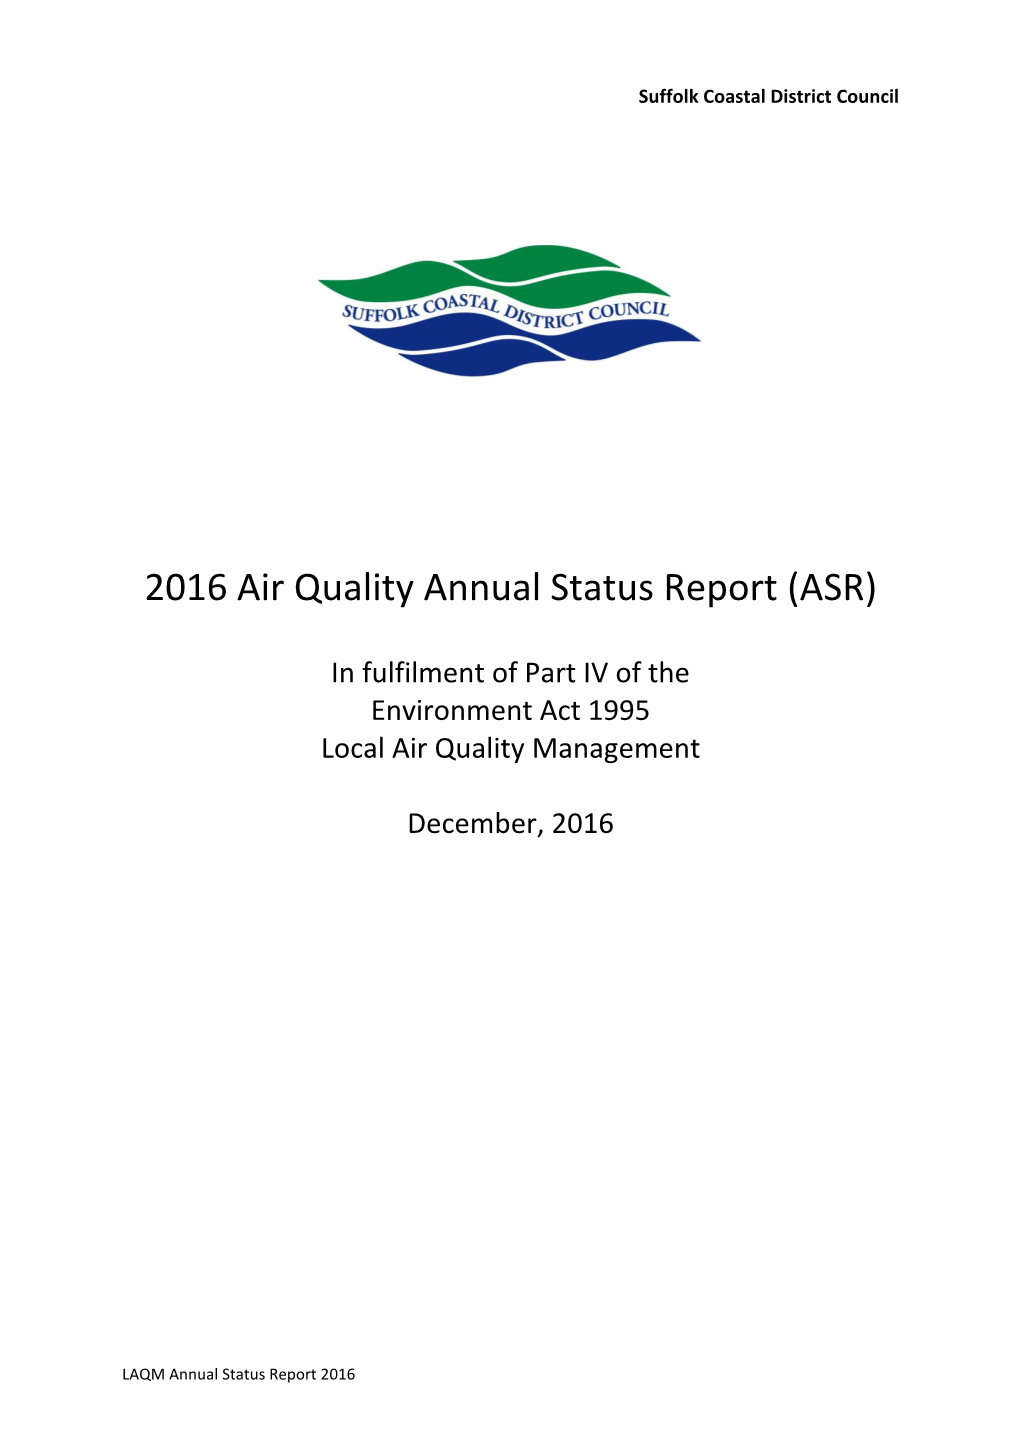 2016 Air Quality Annual Status Report for Suffolk Coastal District Council